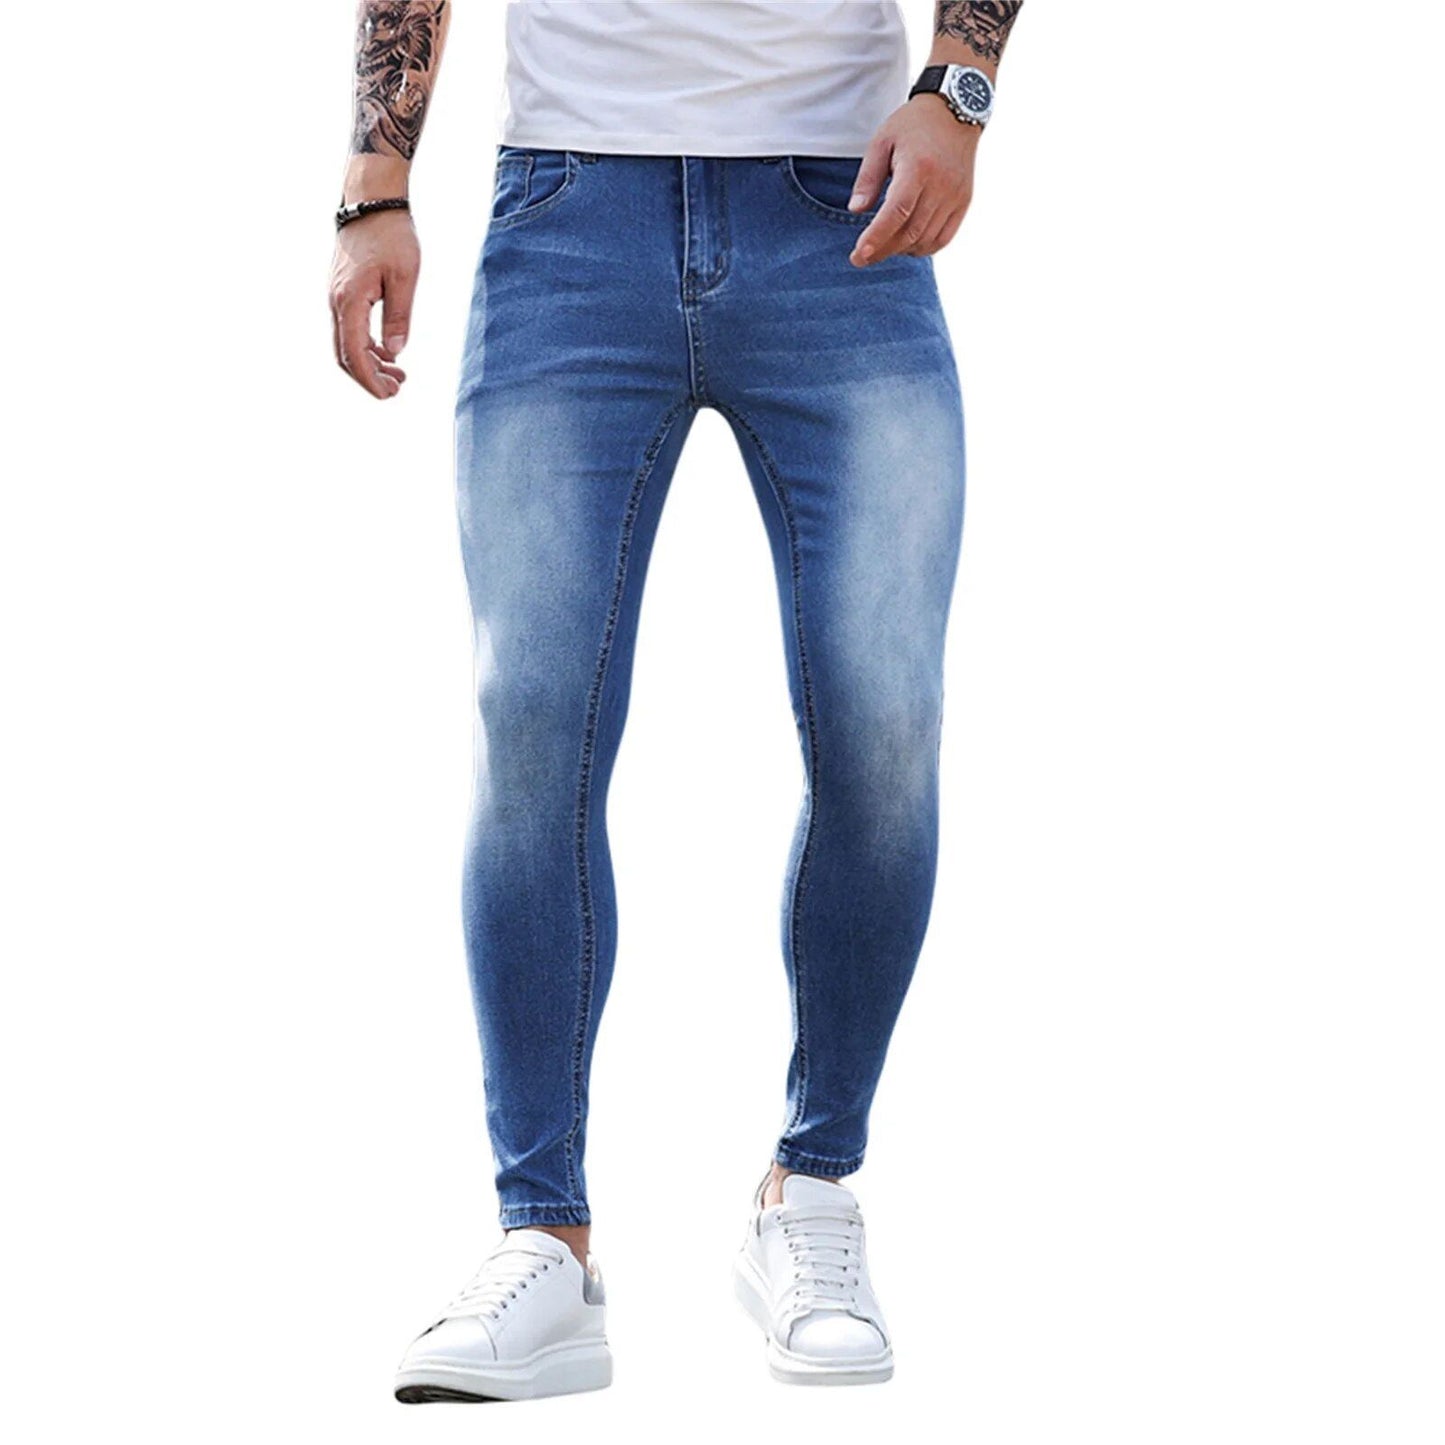 Stylish men's skinny slim fit stretch jeans in blue, complete with pockets